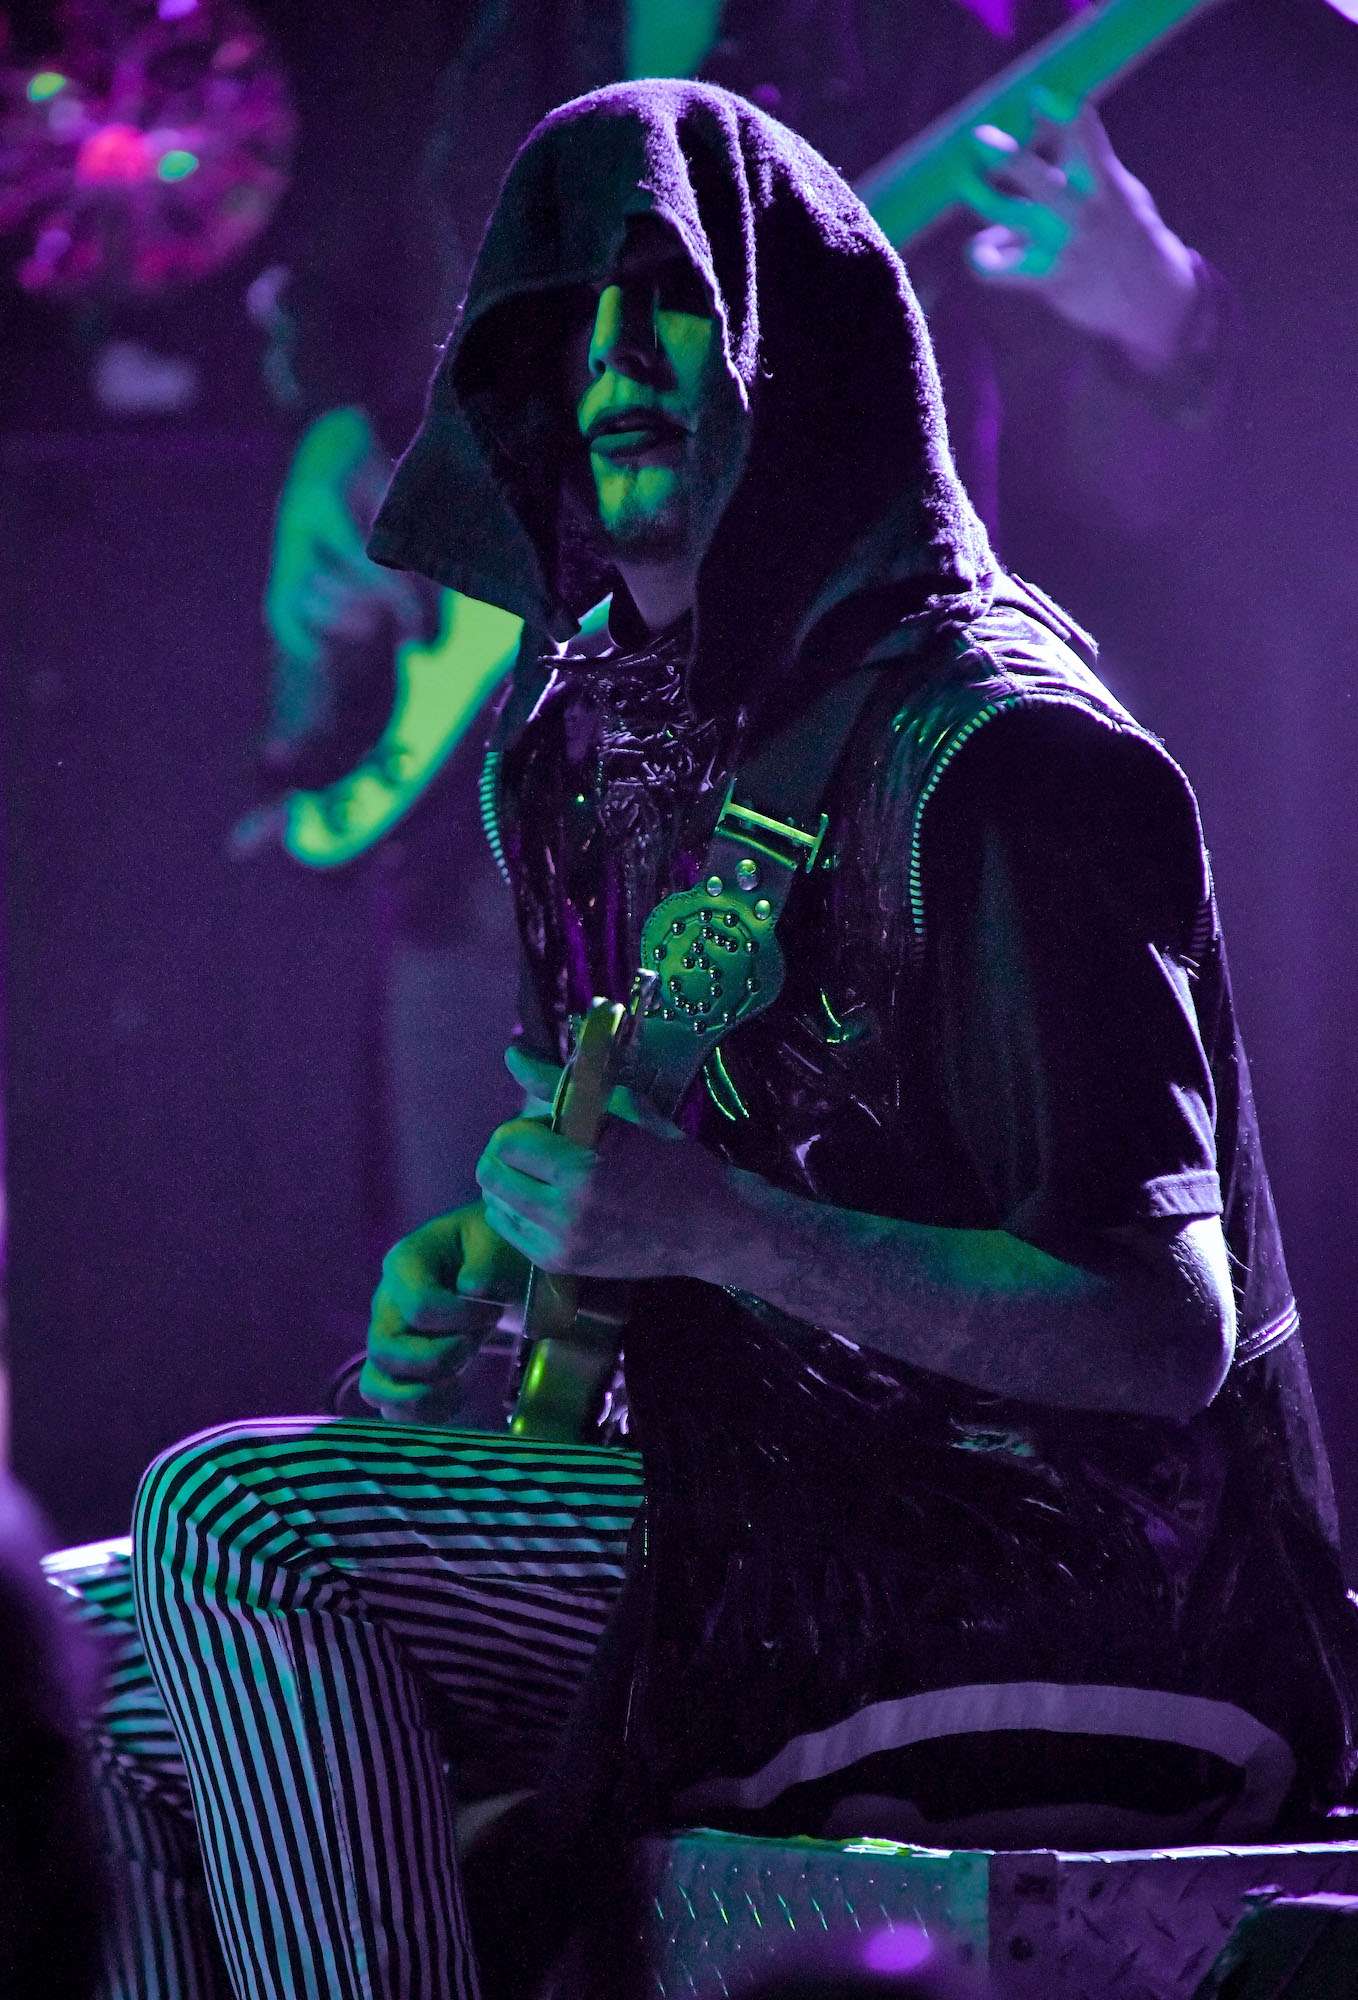 John 5 Live at The Forge [GALLERY] 4